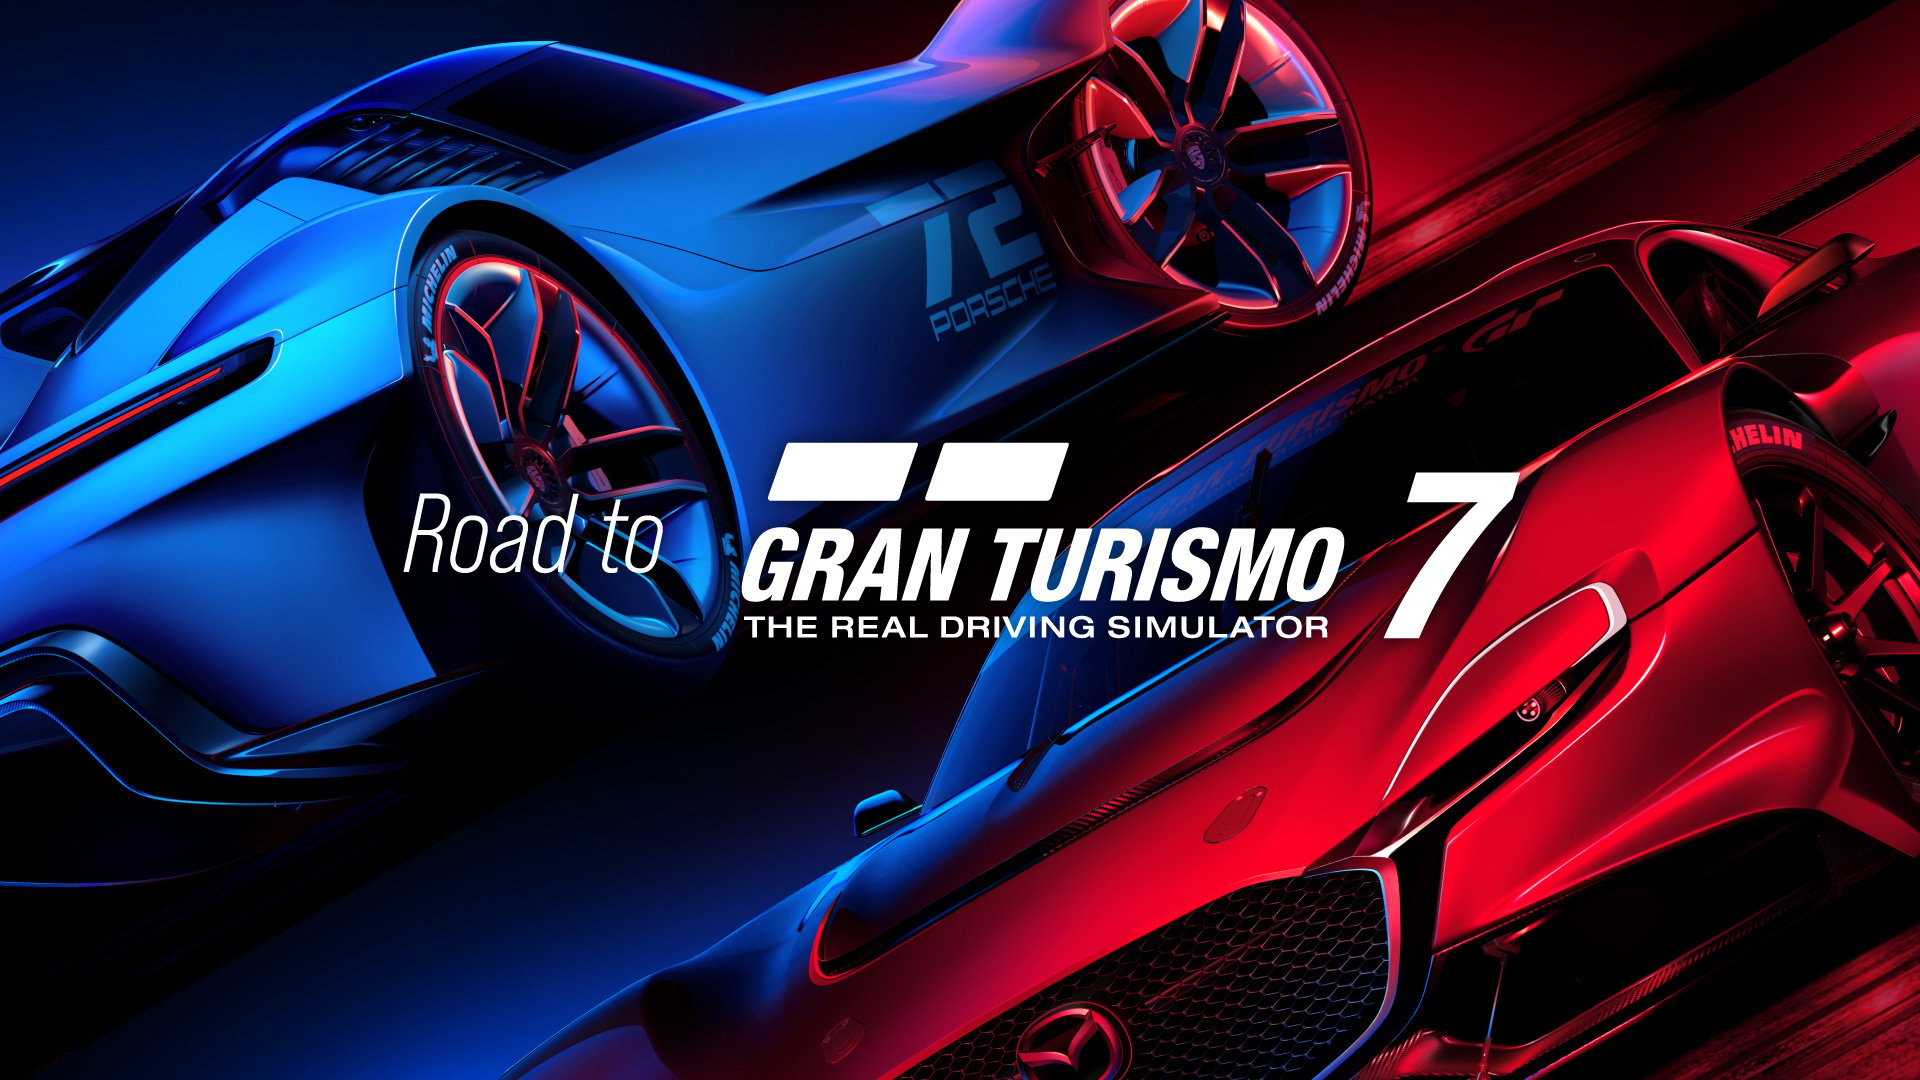 The Road to GT7 Series